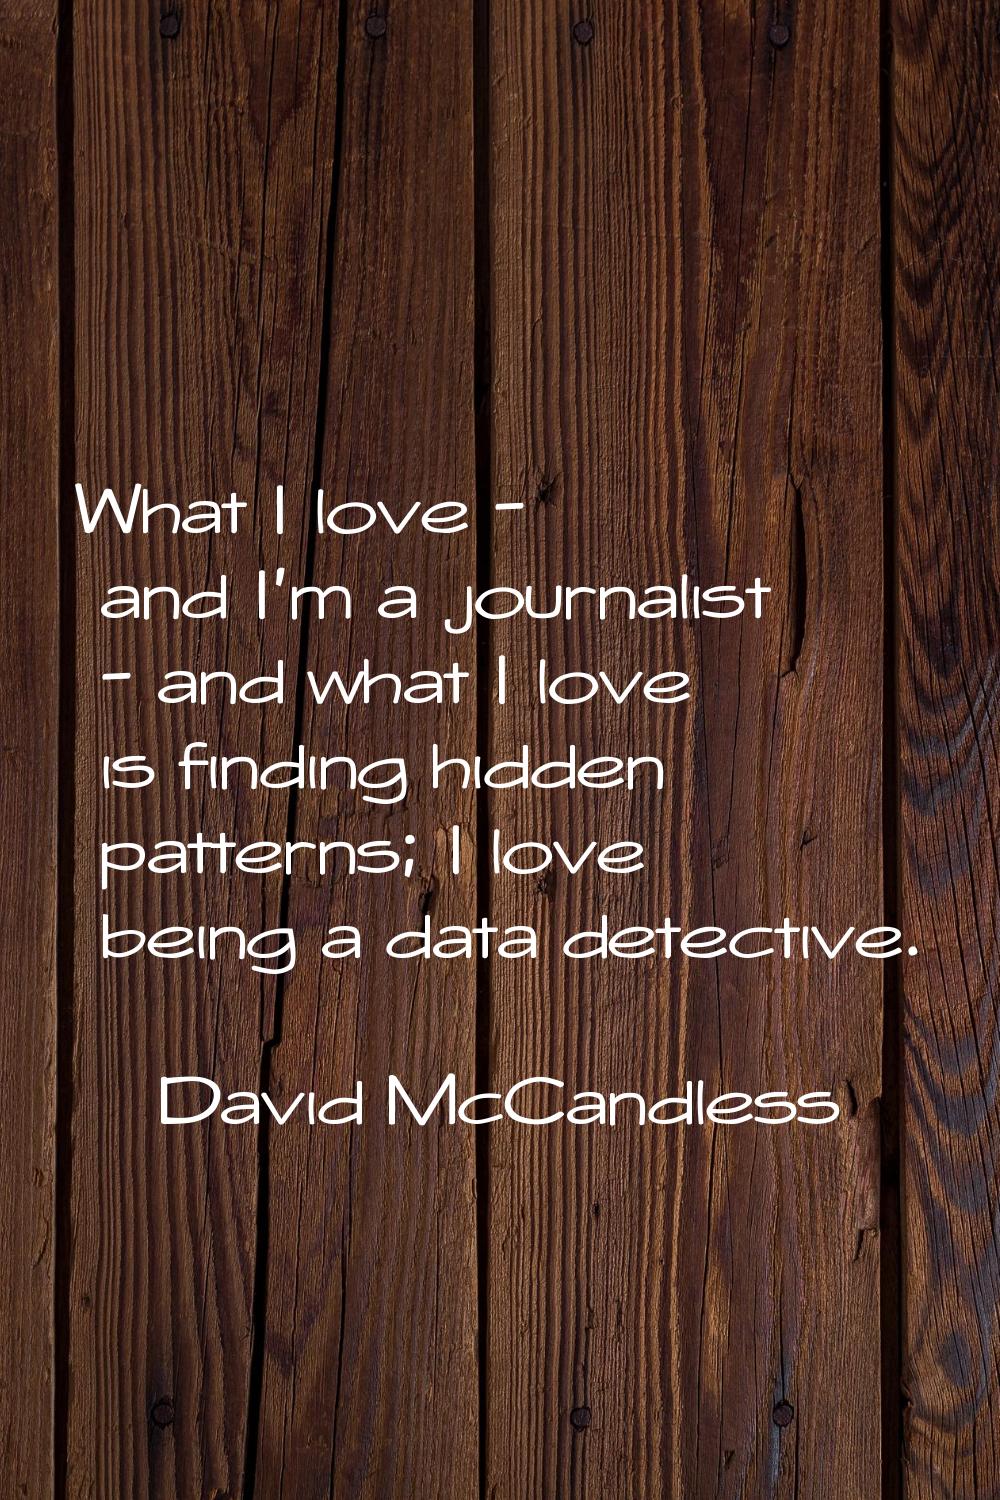 What I love - and I'm a journalist - and what I love is finding hidden patterns; I love being a dat